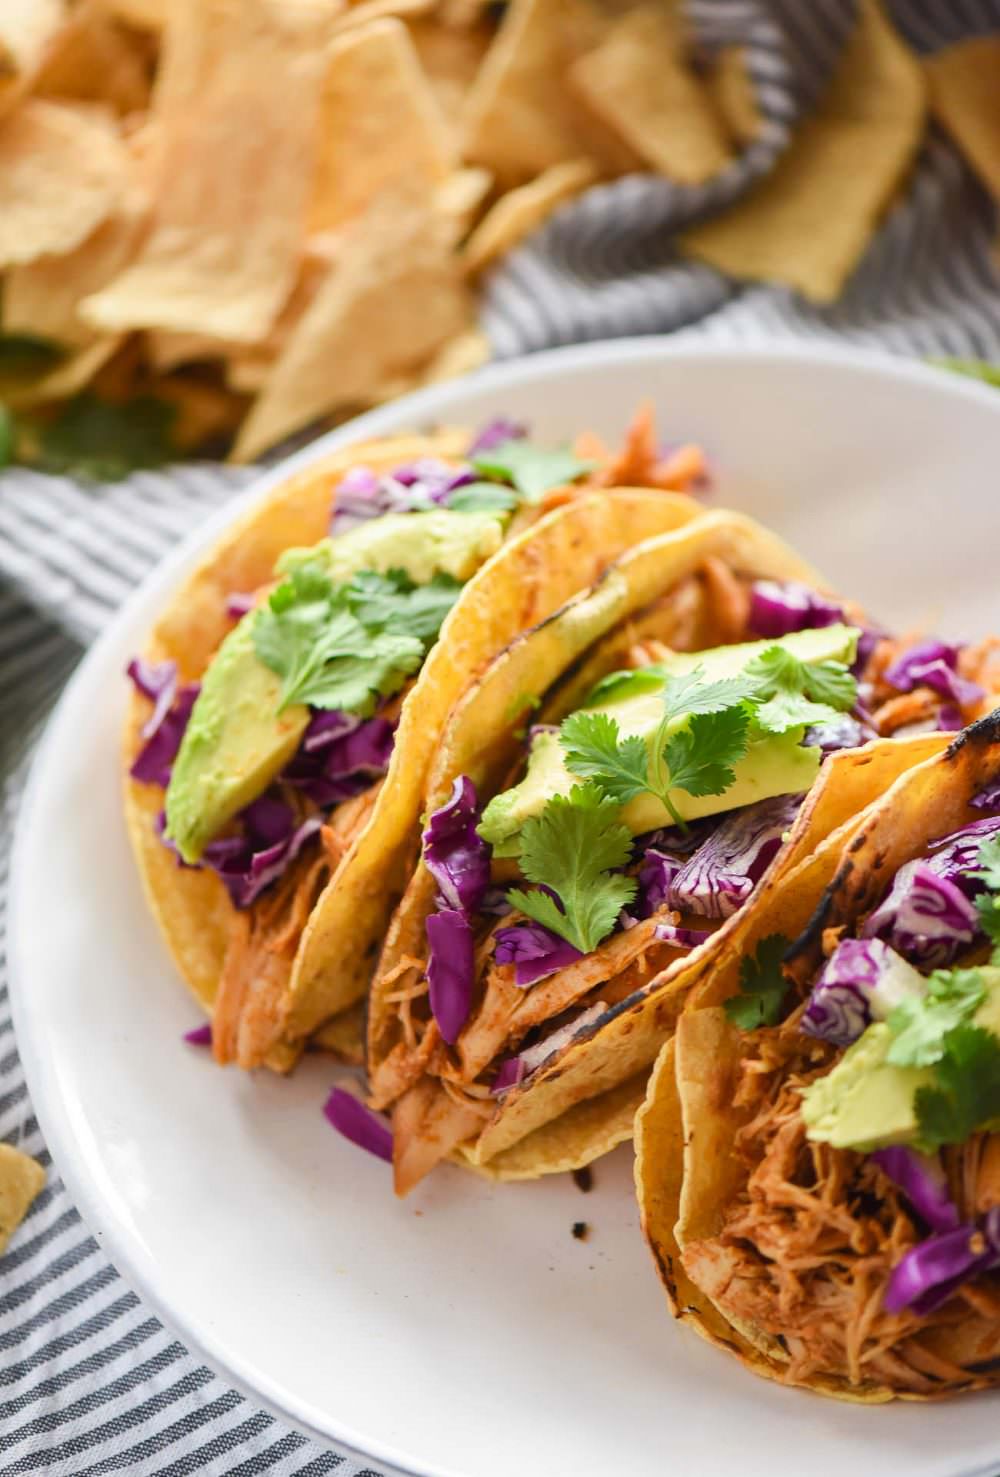 Slow Cooker Honey Chipotle Chicken Tacos are slightly sweet and slightly spicy! The slow cooked chicken is fall apart tender, juicy and full of chipotle and honey! Delicious in tacos or over lettuce for a lighter option!